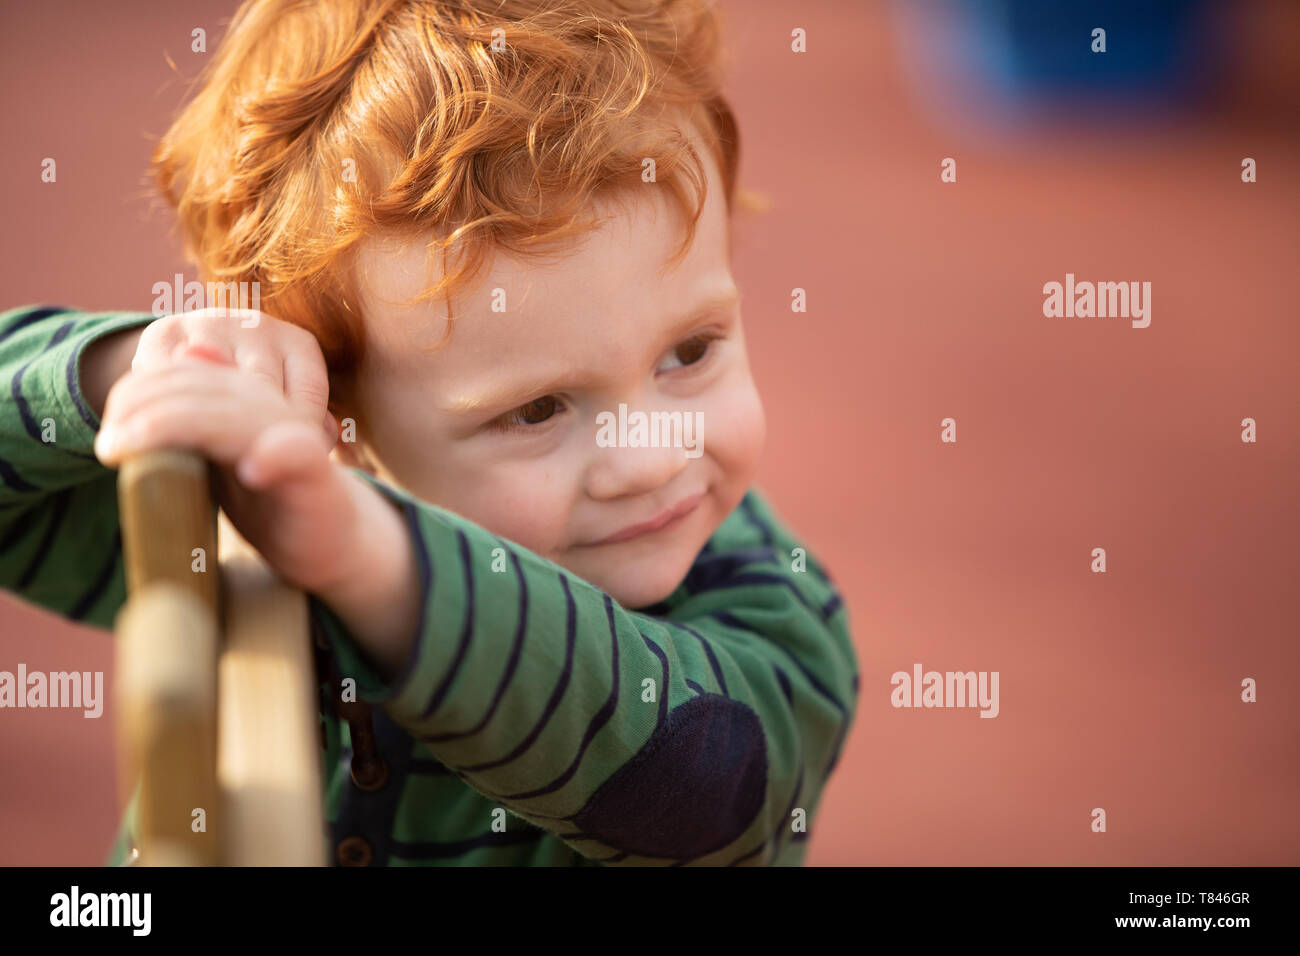 Portrait of boy with red hair Stock Photo